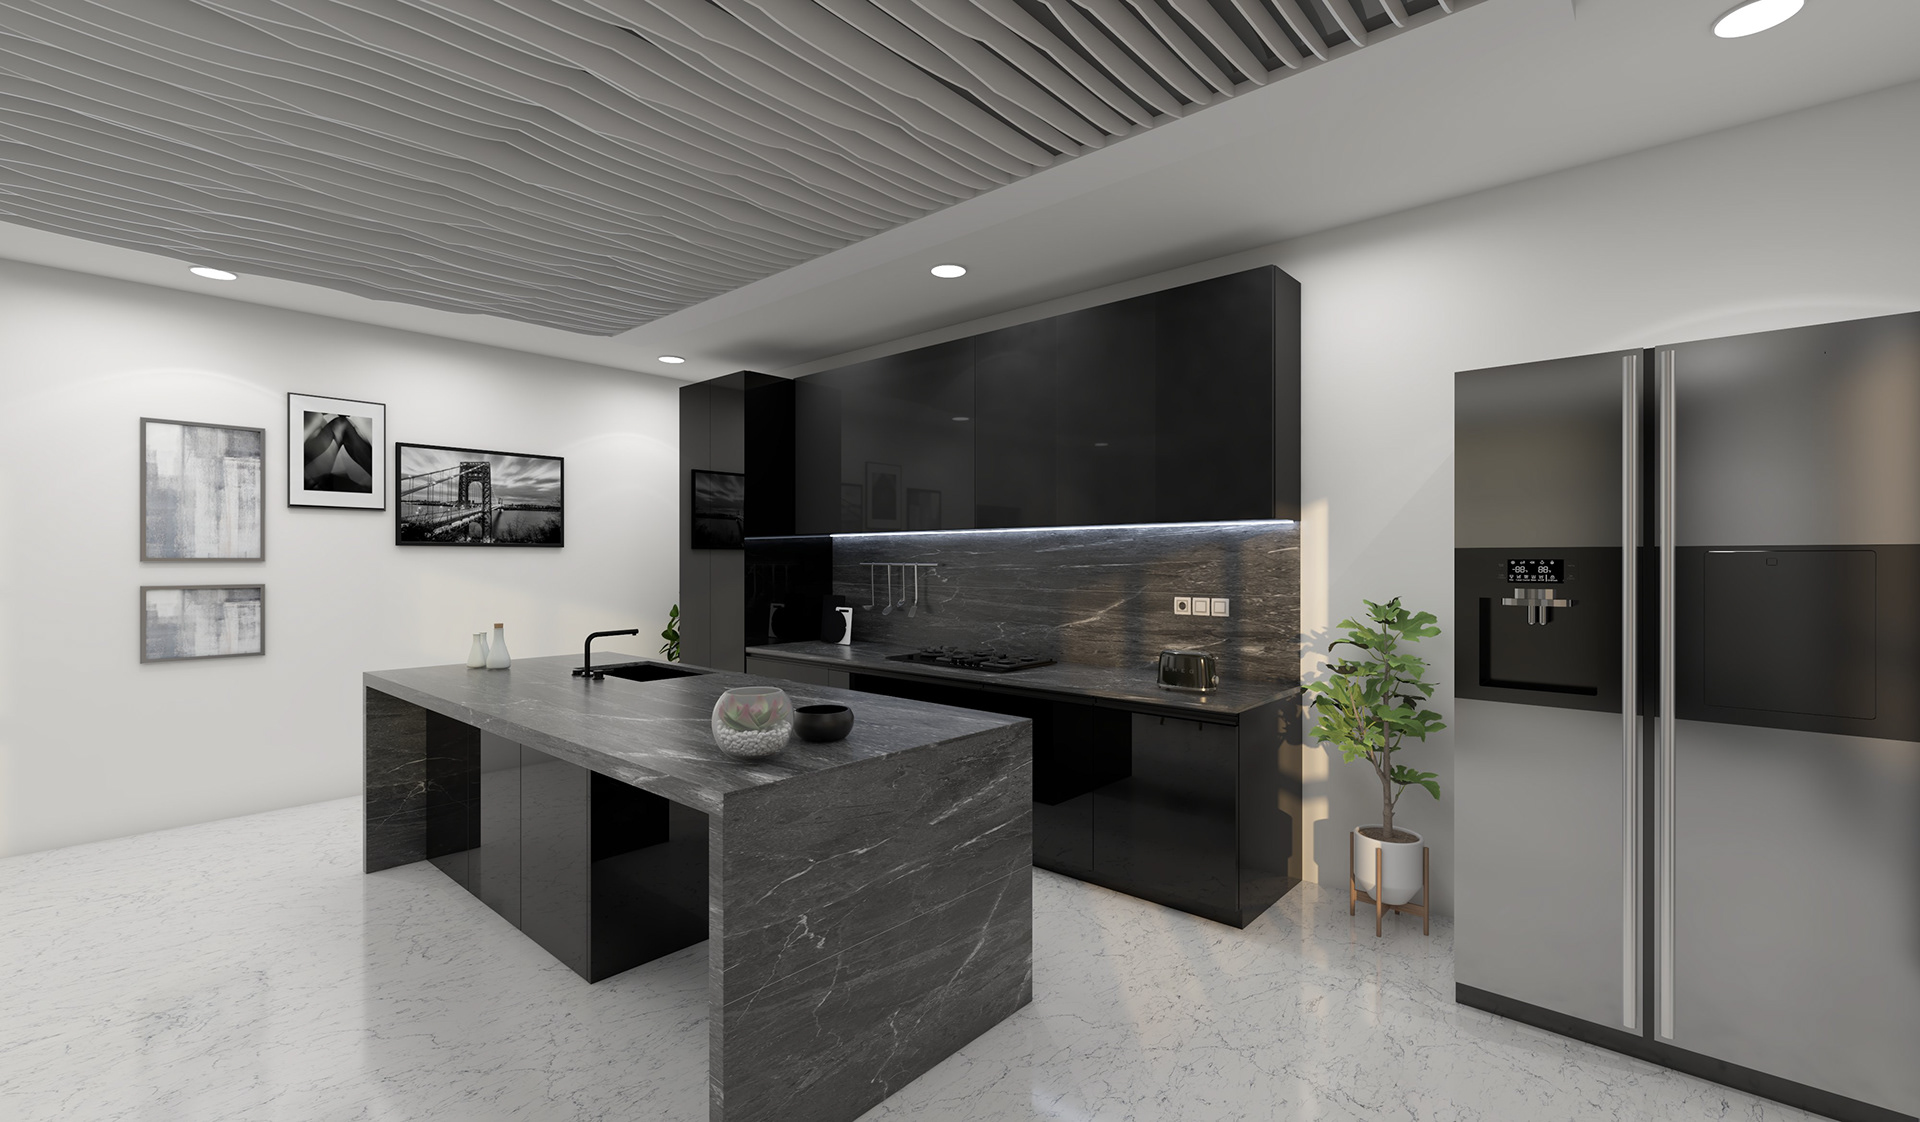 Black Aesthetic Kitchen and dining design on Behance